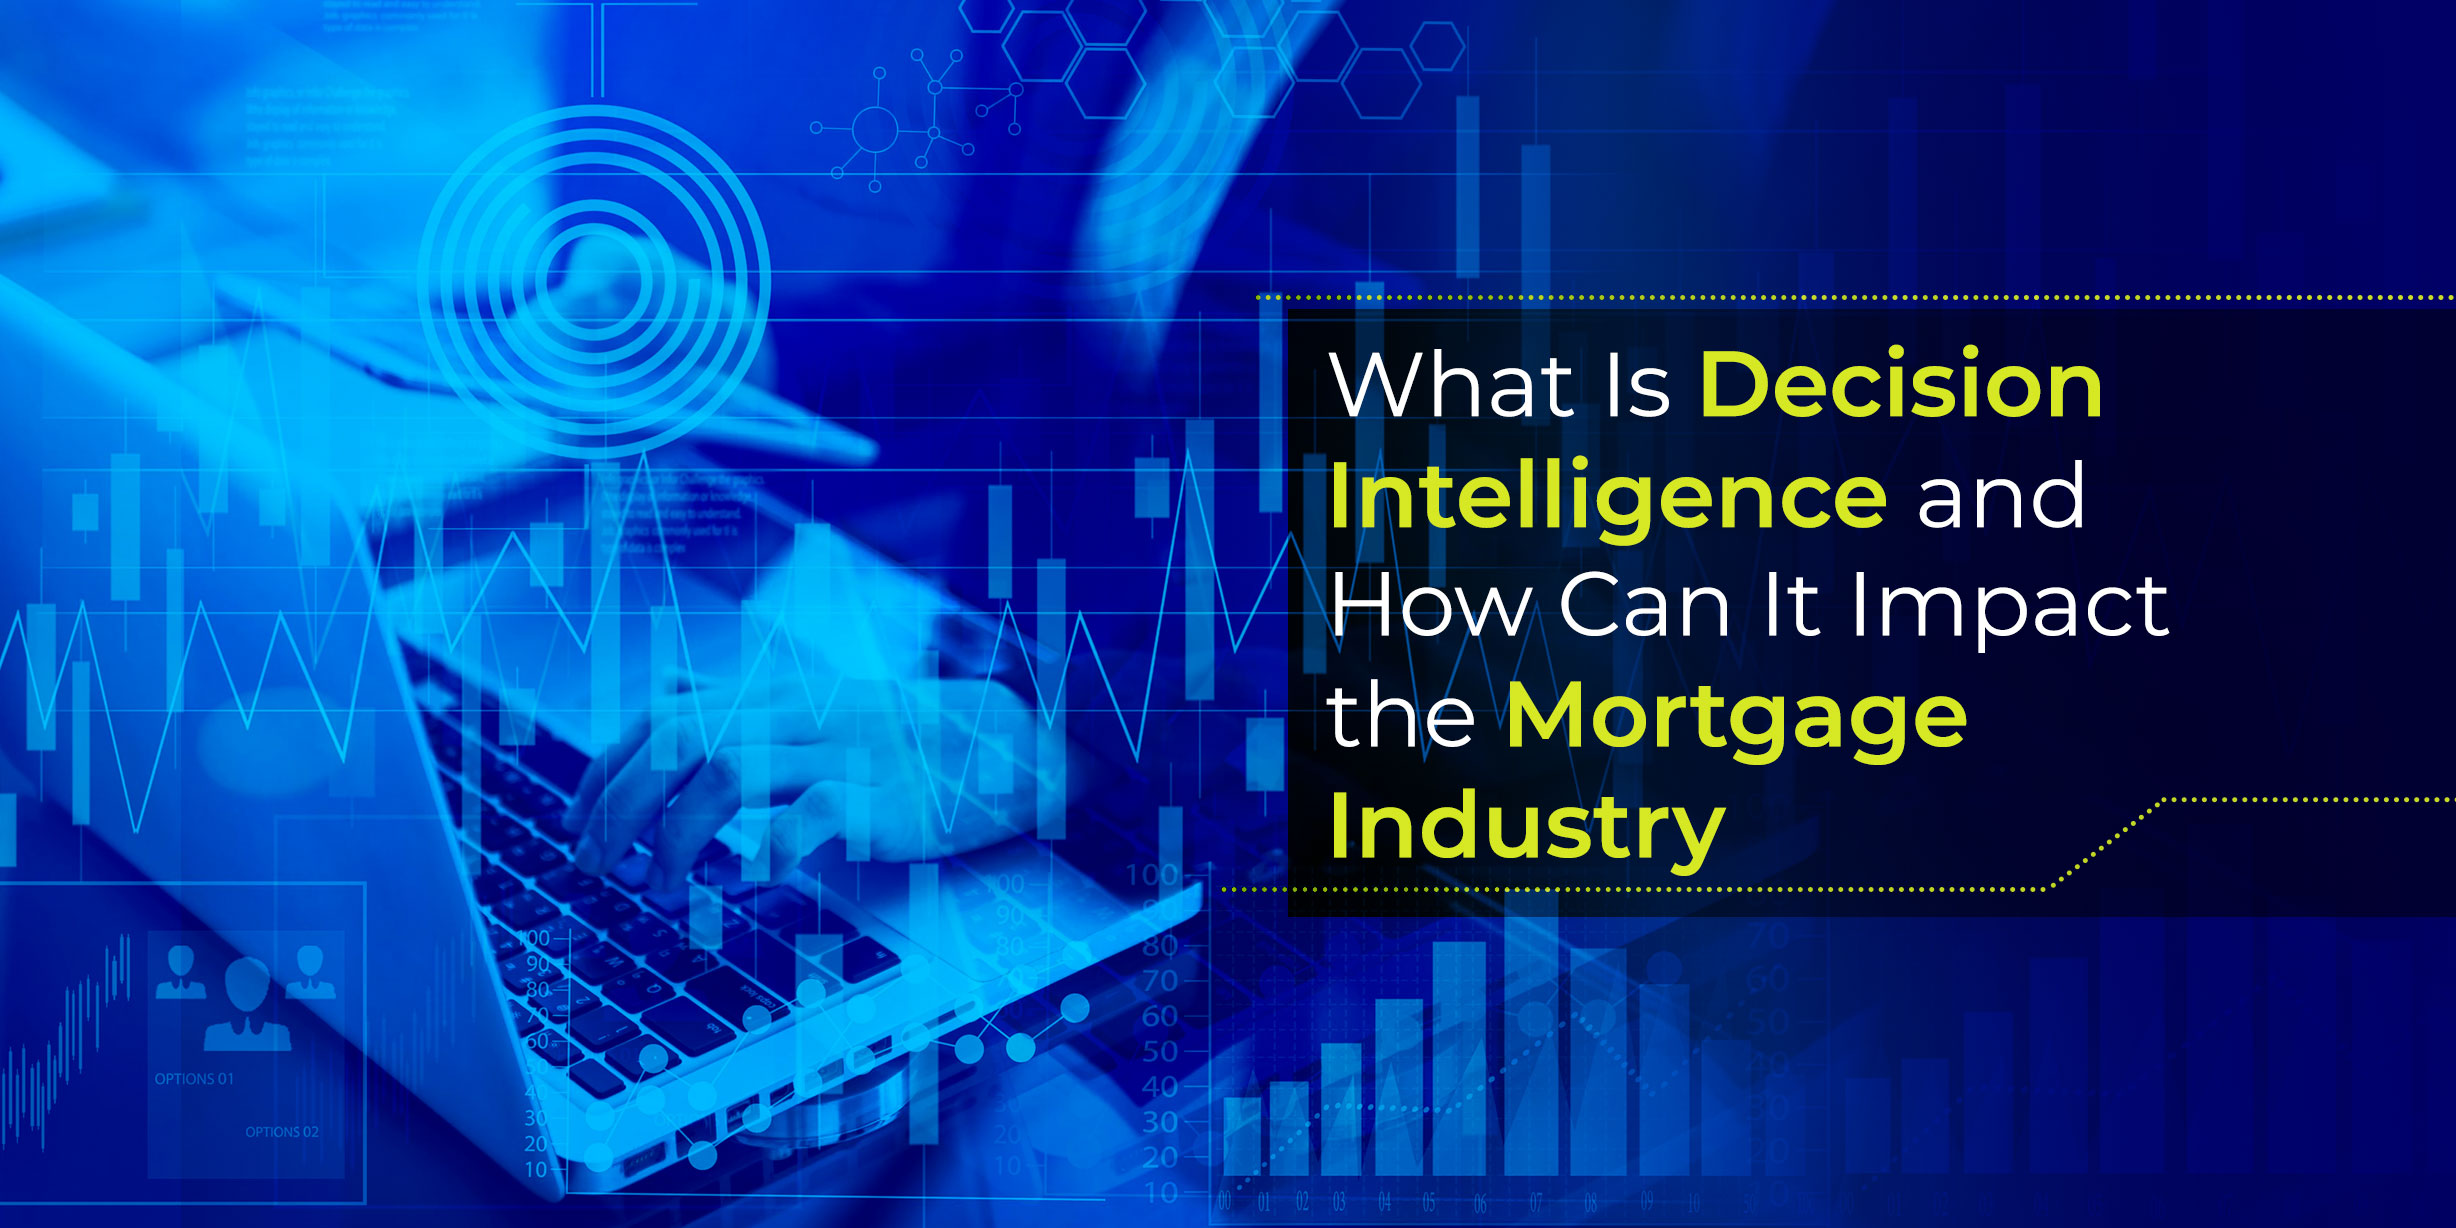 What Is Decision Intelligence and How Can It Impact the Mortgage Industry